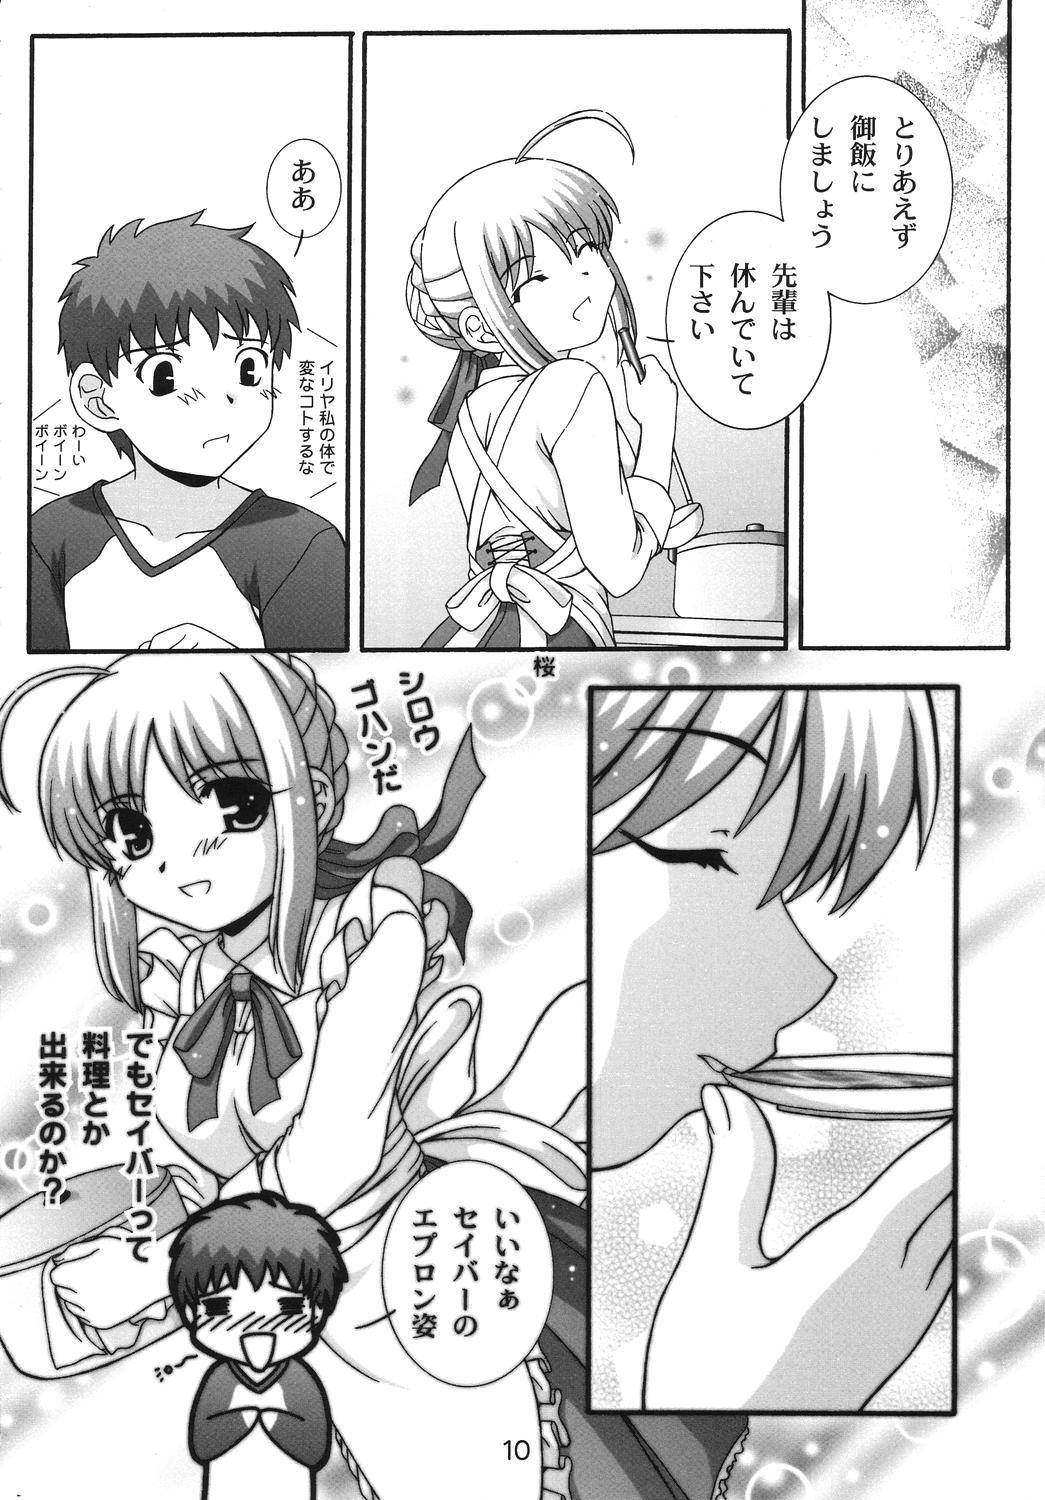 Gordibuena SECRET FILE NEXT 11 - Fate is capricious - Fate stay night Gay Outinpublic - Page 9